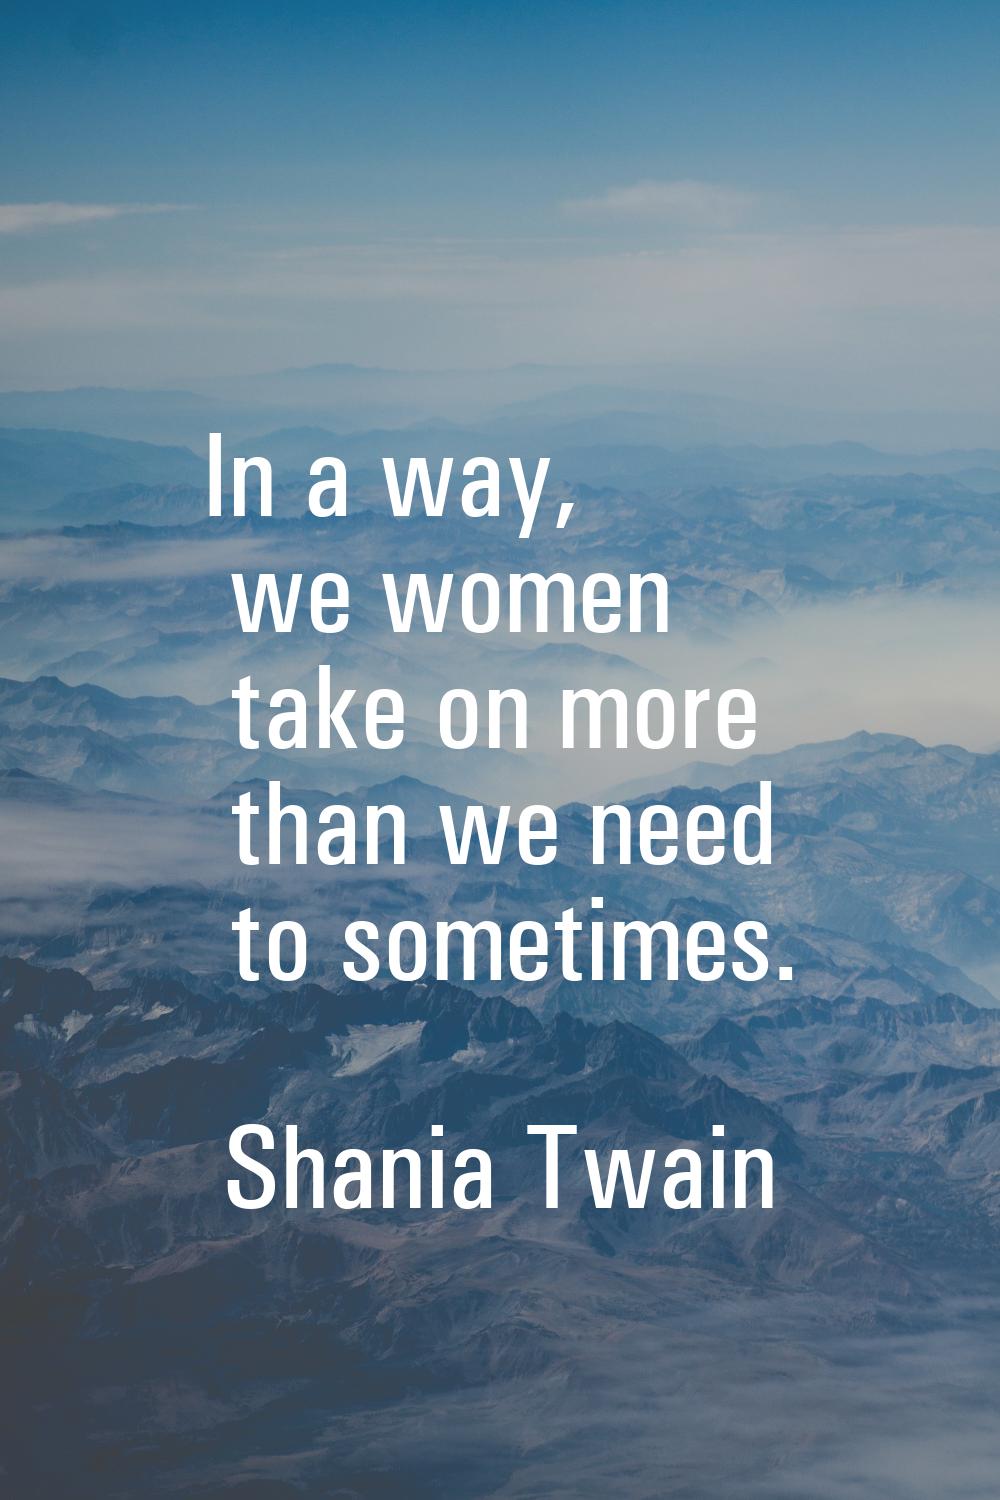 In a way, we women take on more than we need to sometimes.